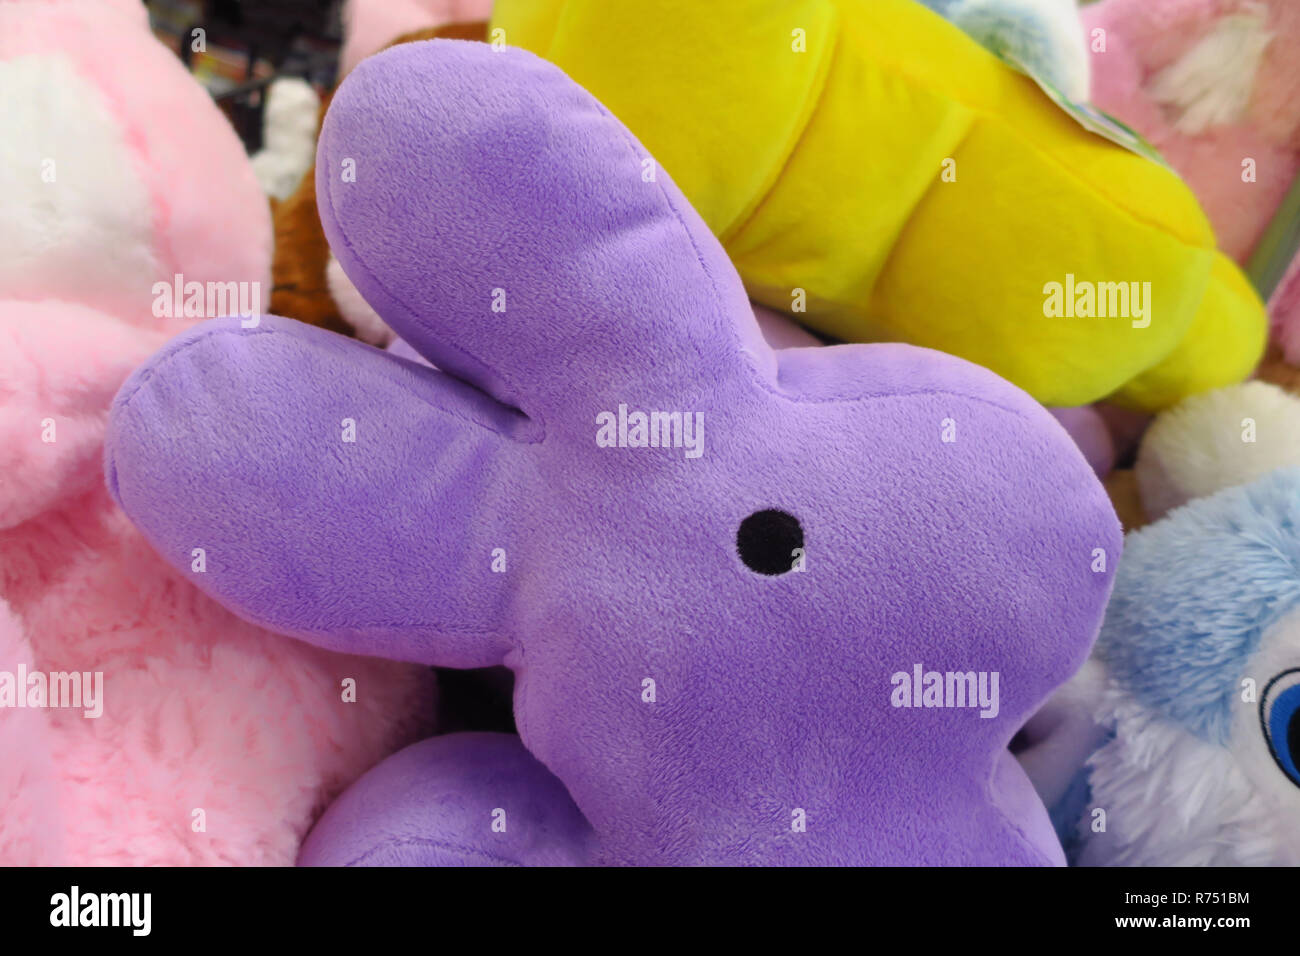 A stuffed purple bunny in a group of stuffed animals. Stock Photo